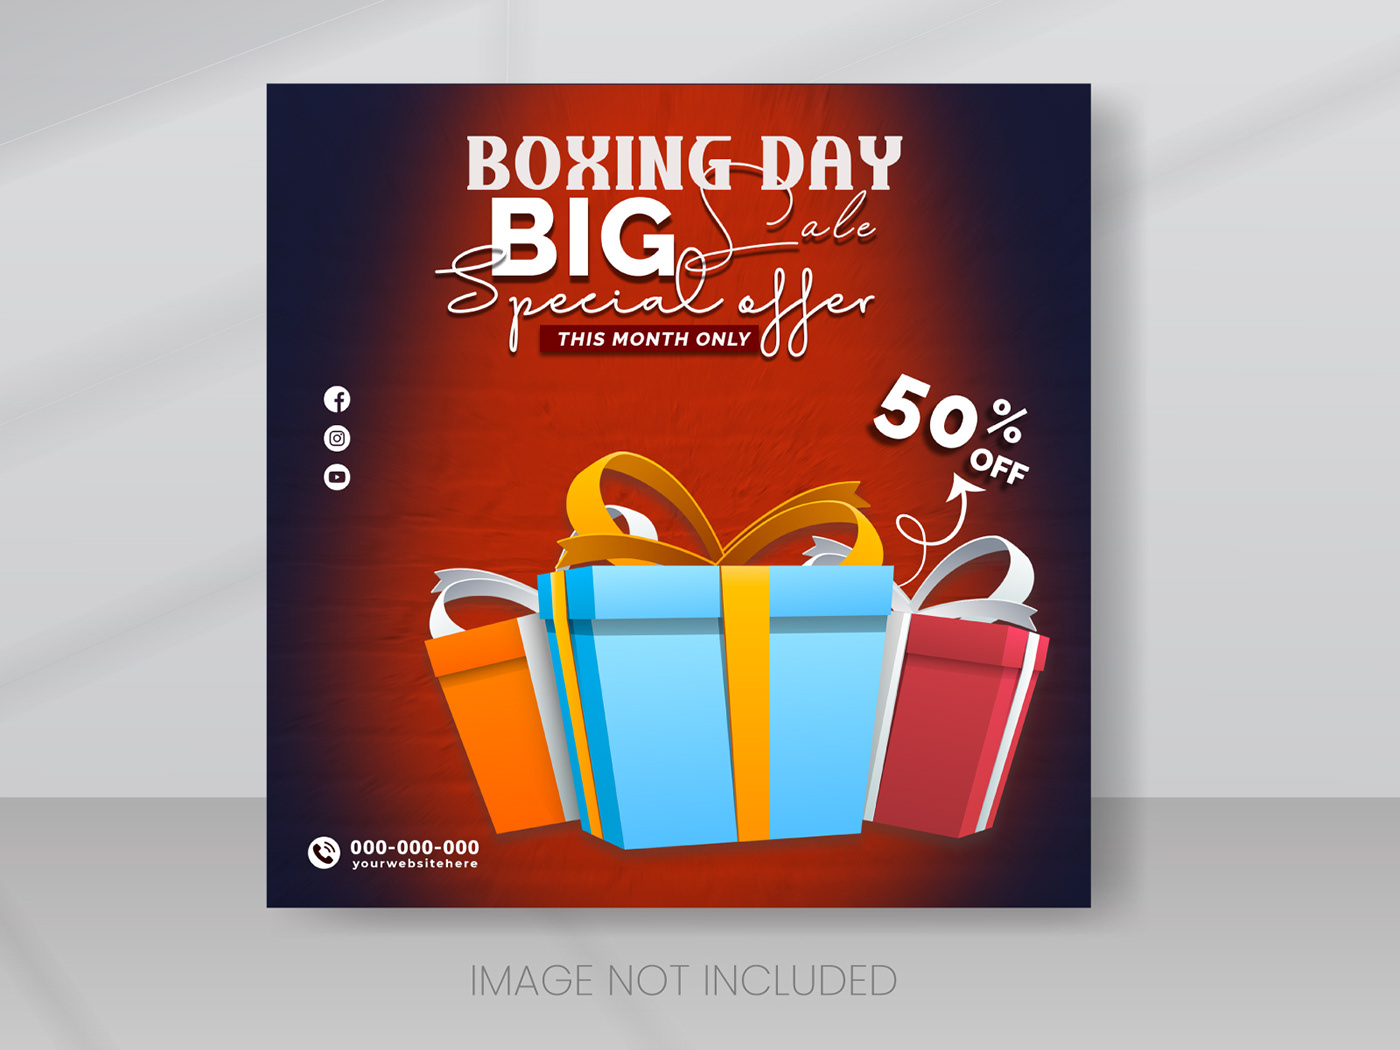 Boxing Day Shopping day bargain Shopping sale Clearance sale background discount background sale clearance sale Christmas Discount